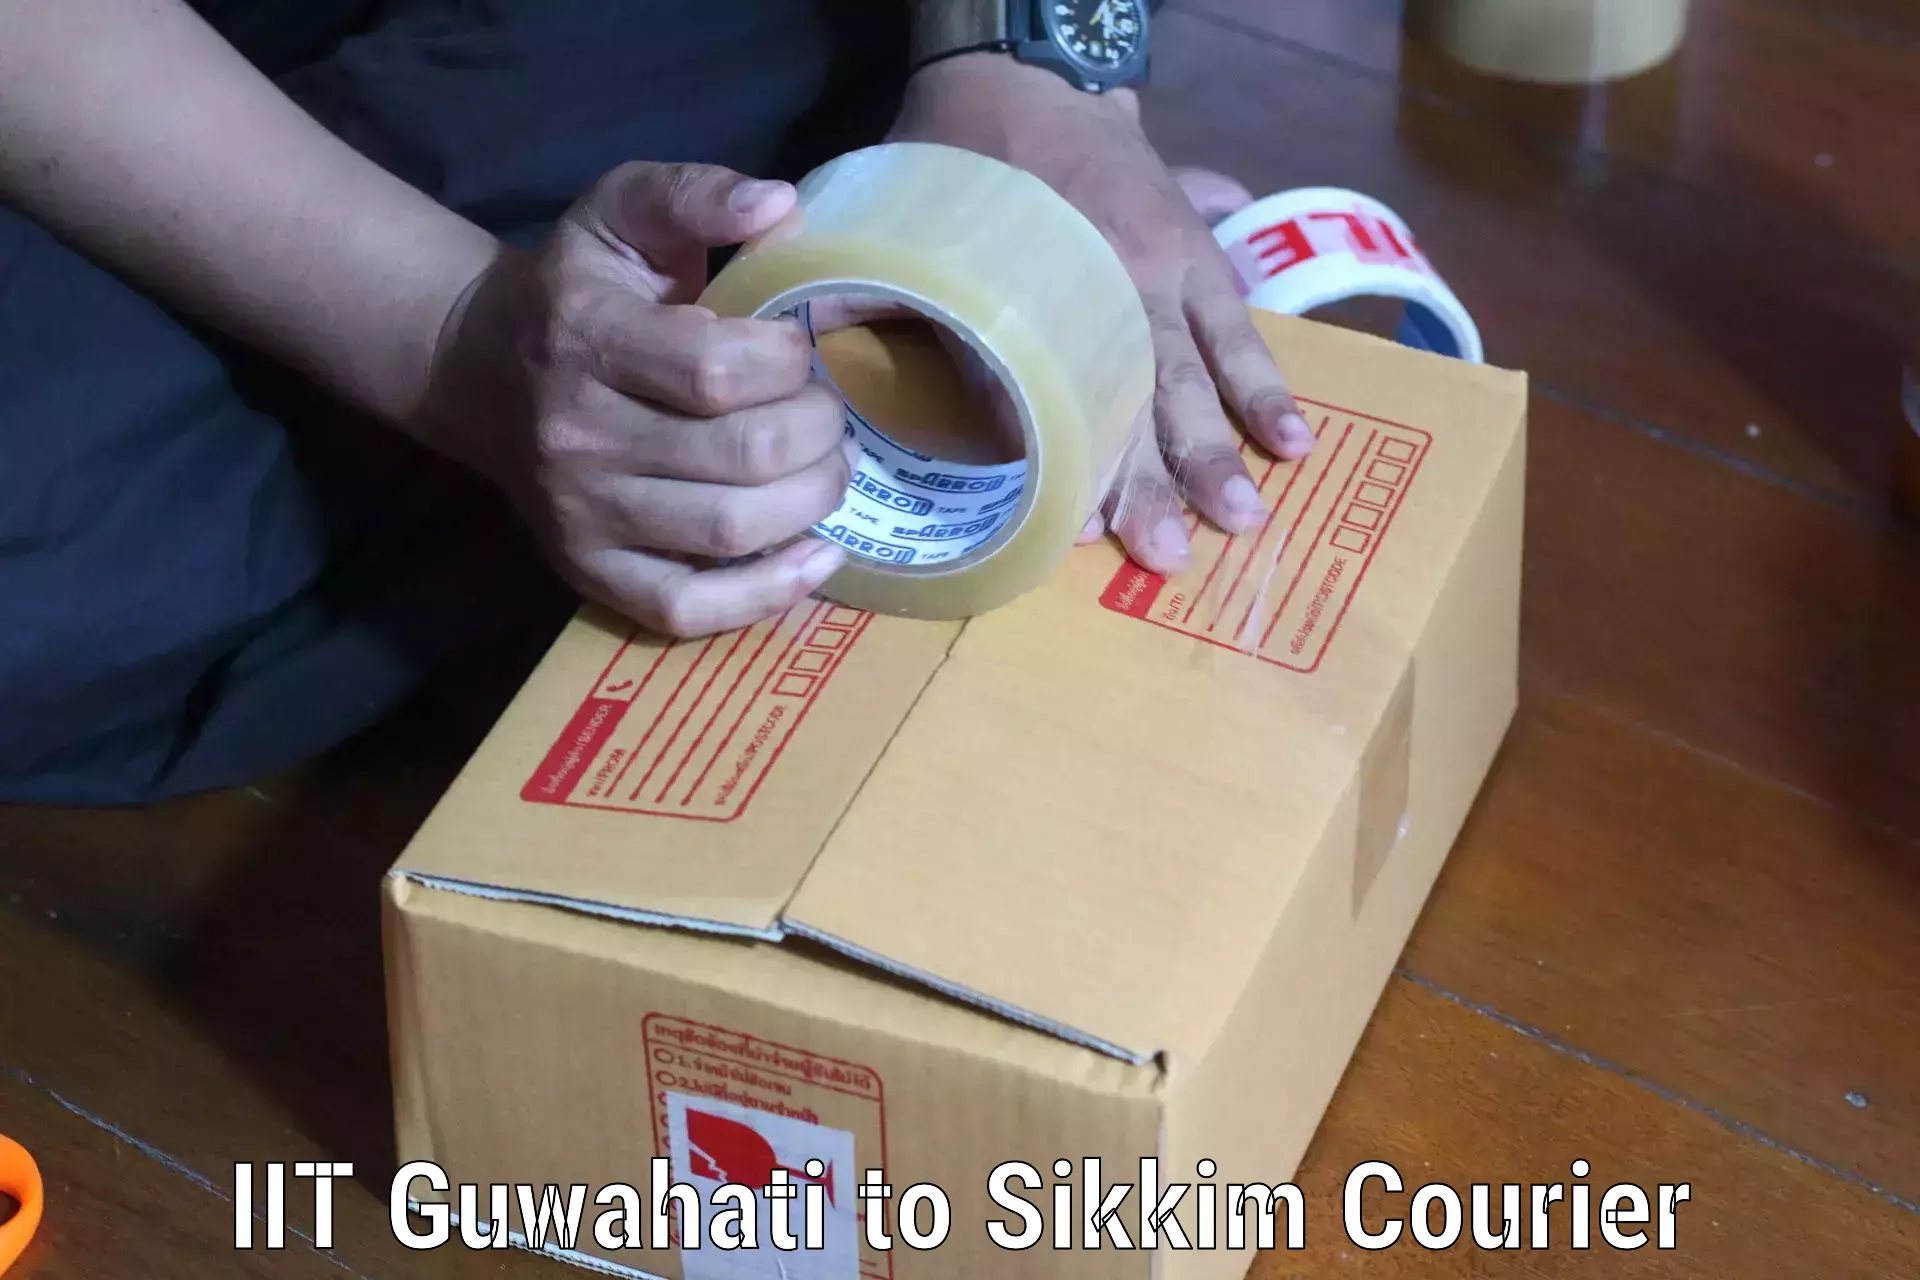 Cargo delivery service IIT Guwahati to East Sikkim